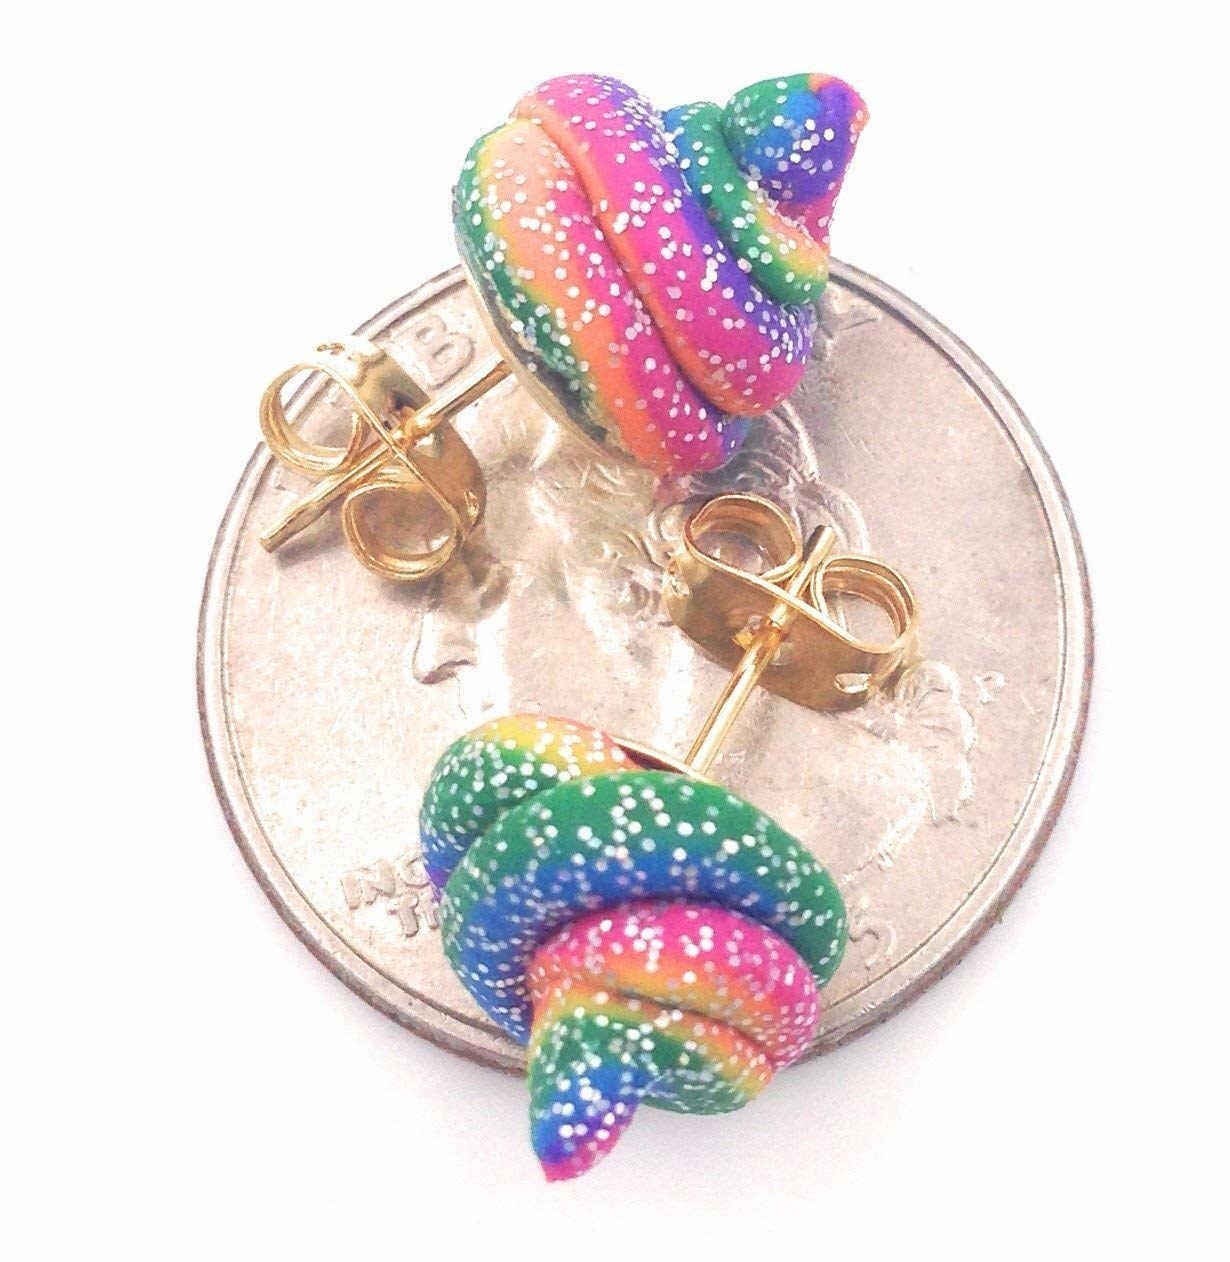 The earrings, which are the size of a penny and look like a pile of rainbow poop with glitter